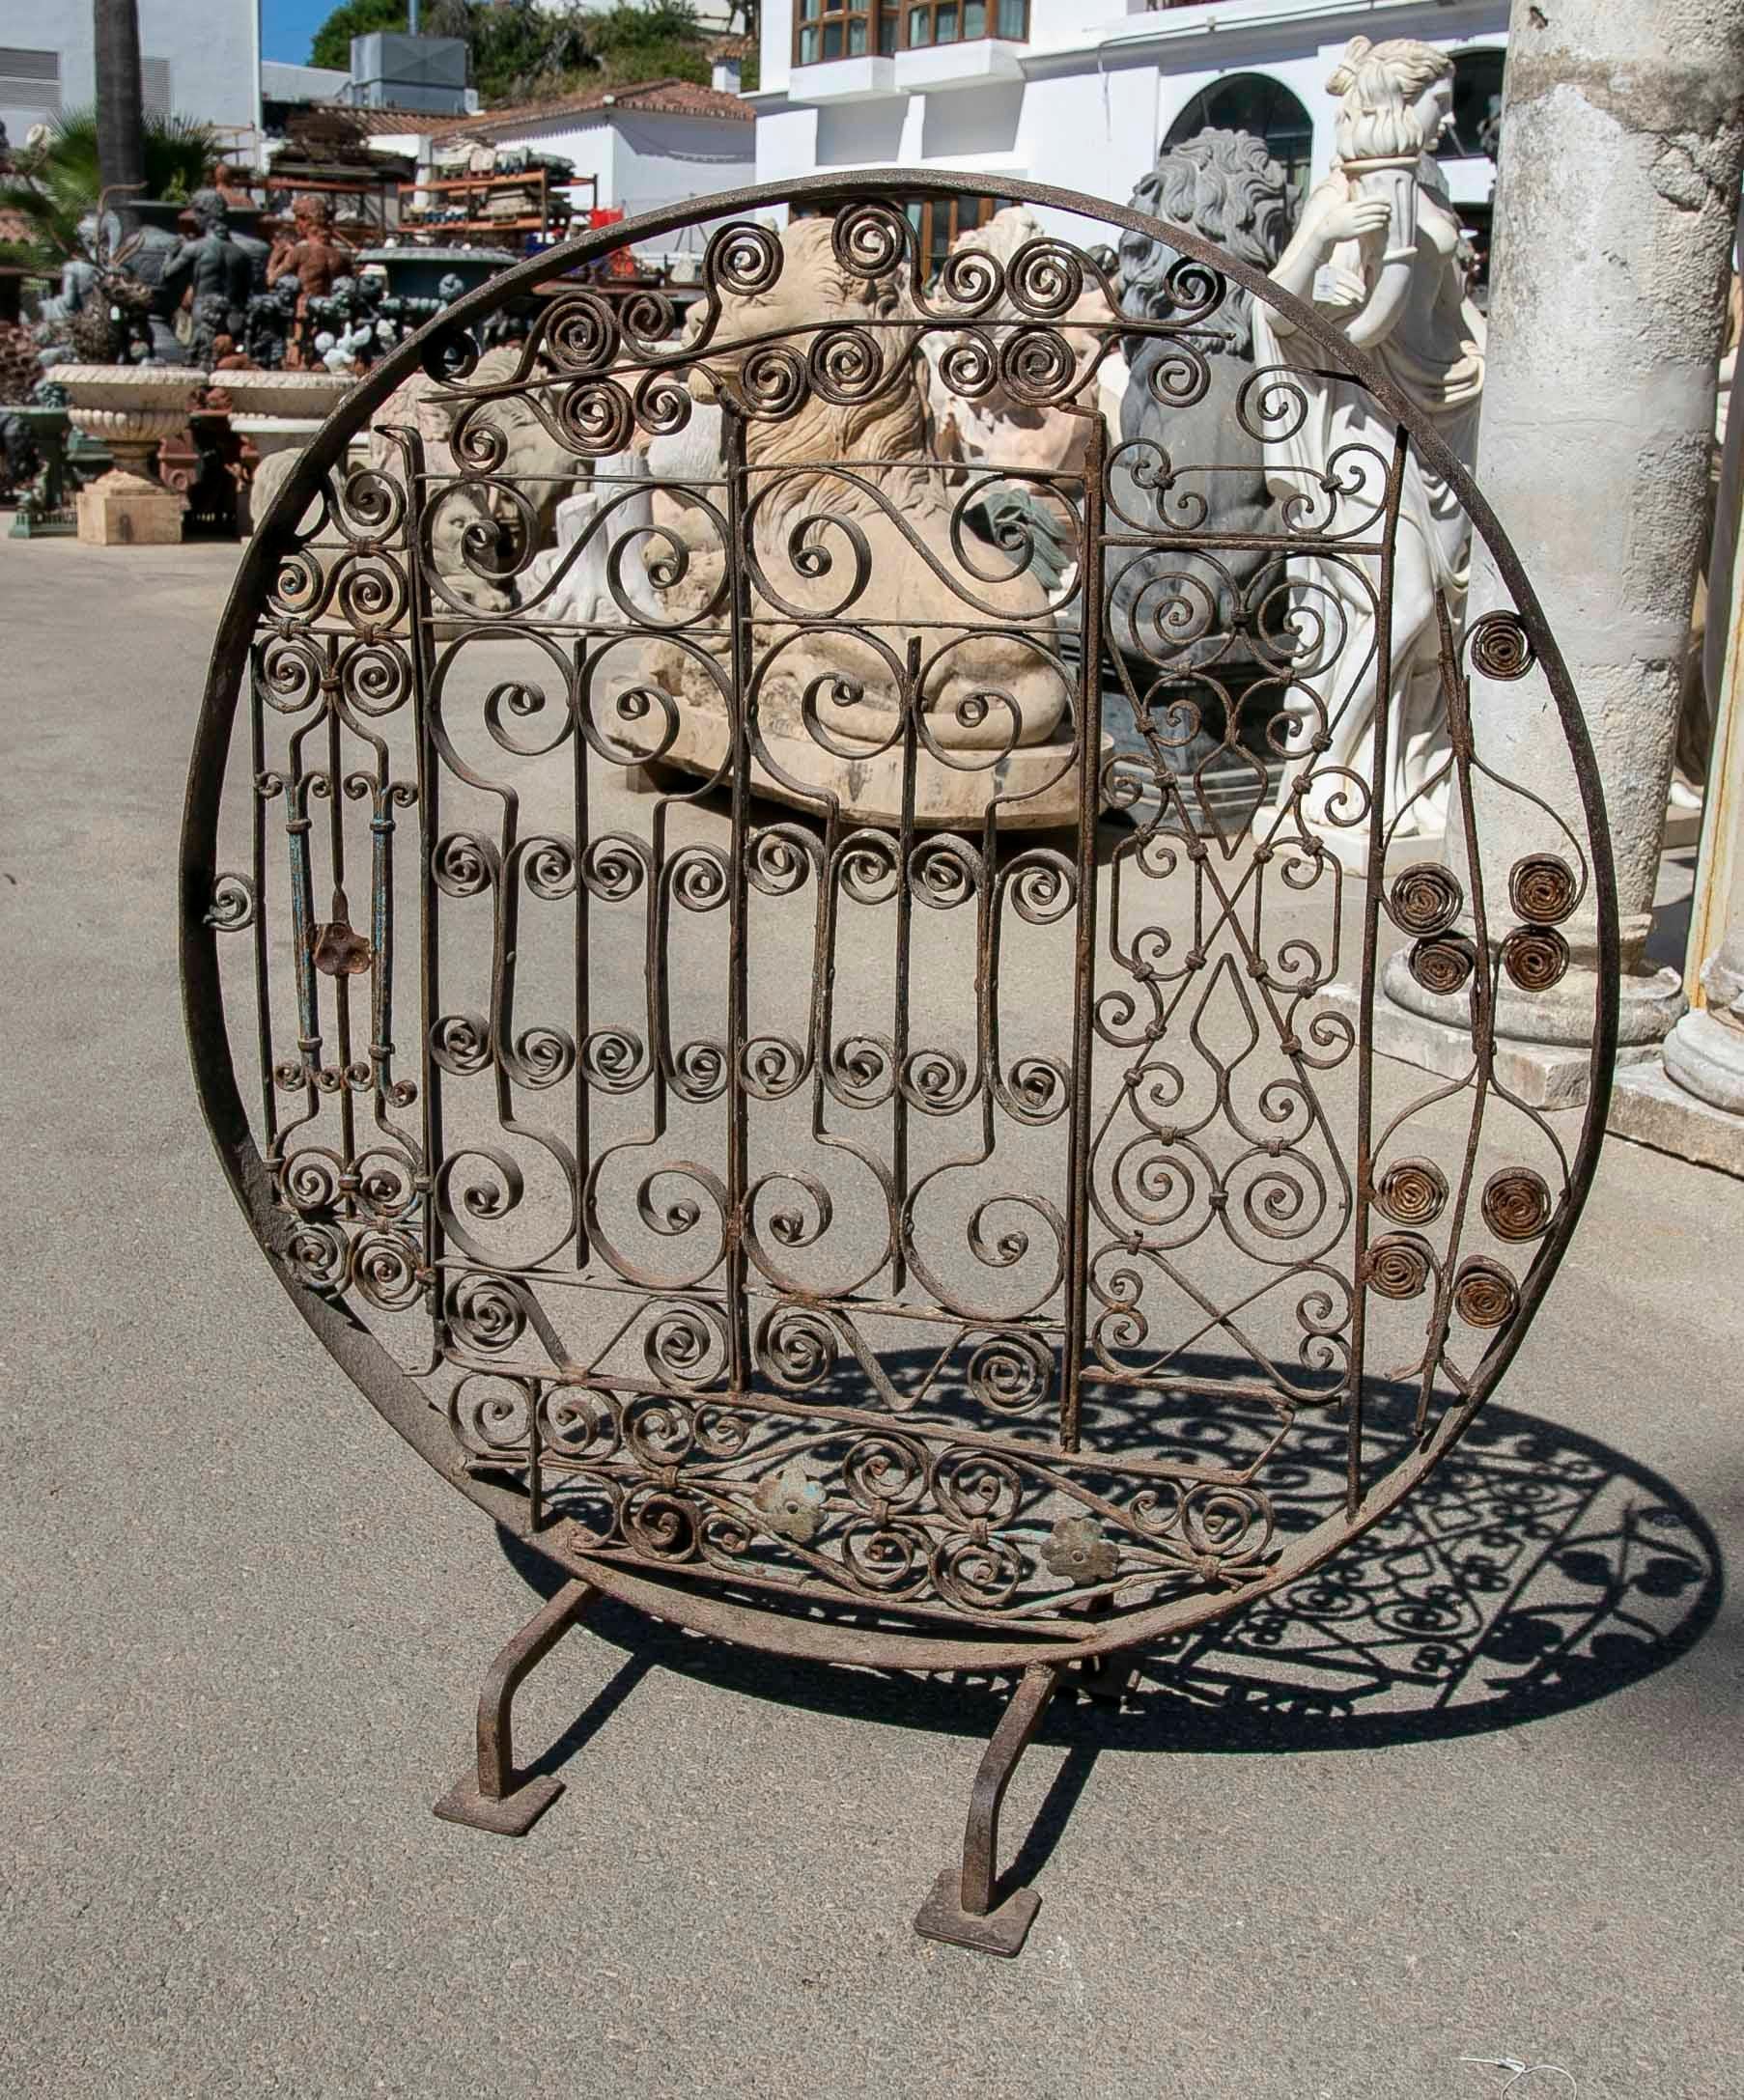 European Iron Sculpture Using the Remains of Iron Balconies and Iron Windows For Sale